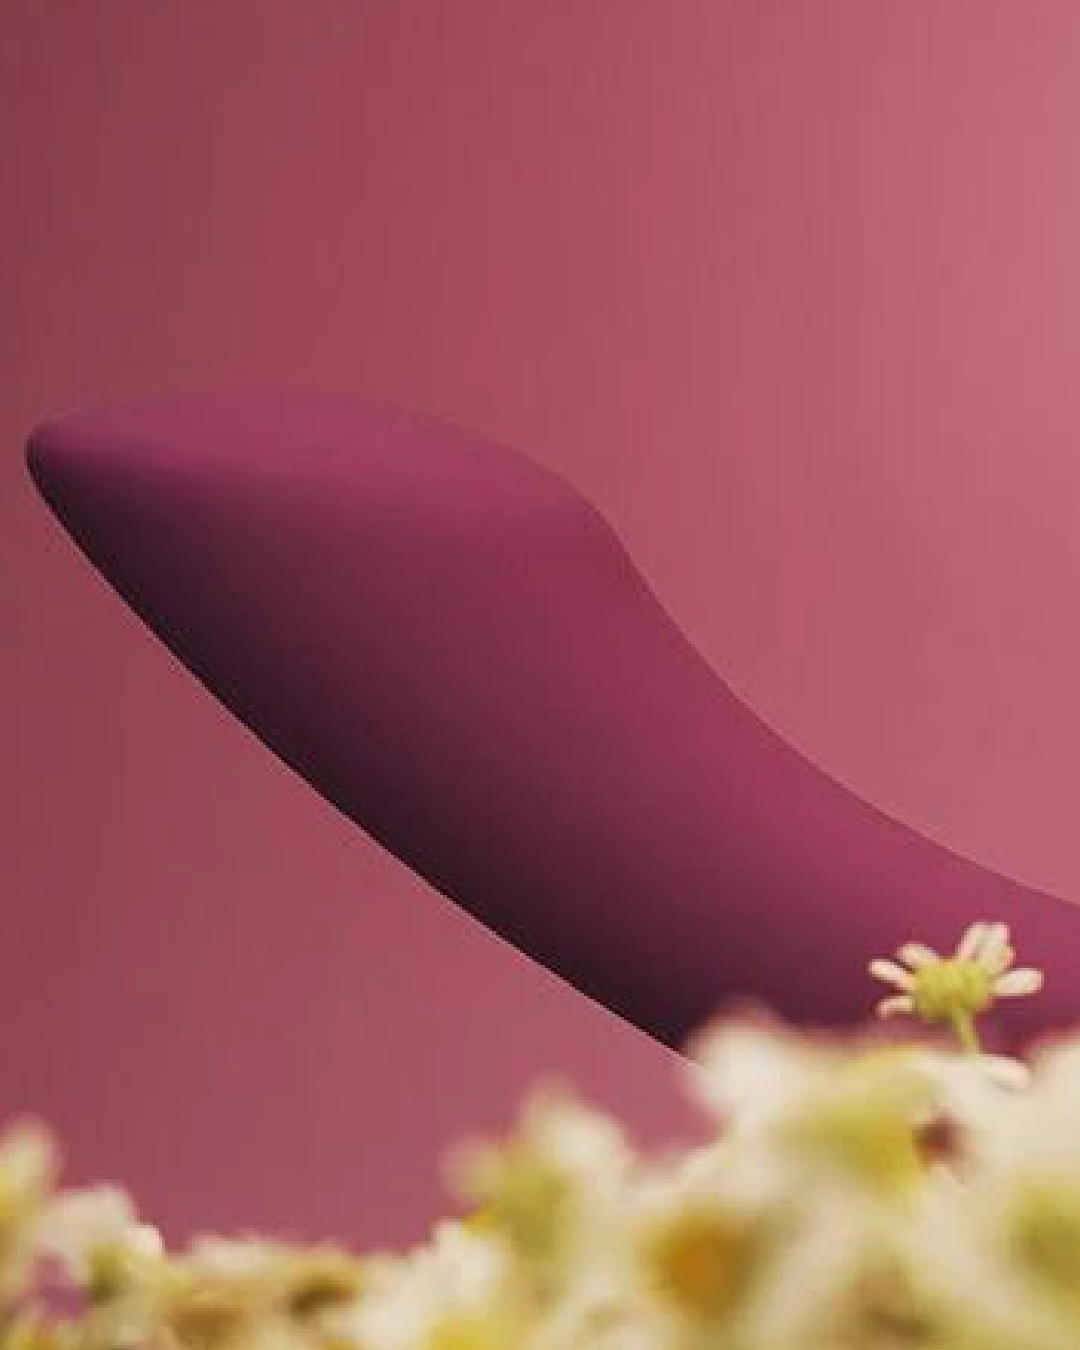 Svakom Amy 2 Flexible G-Spot Vibrator tip on burgundy background with yellow flowers 